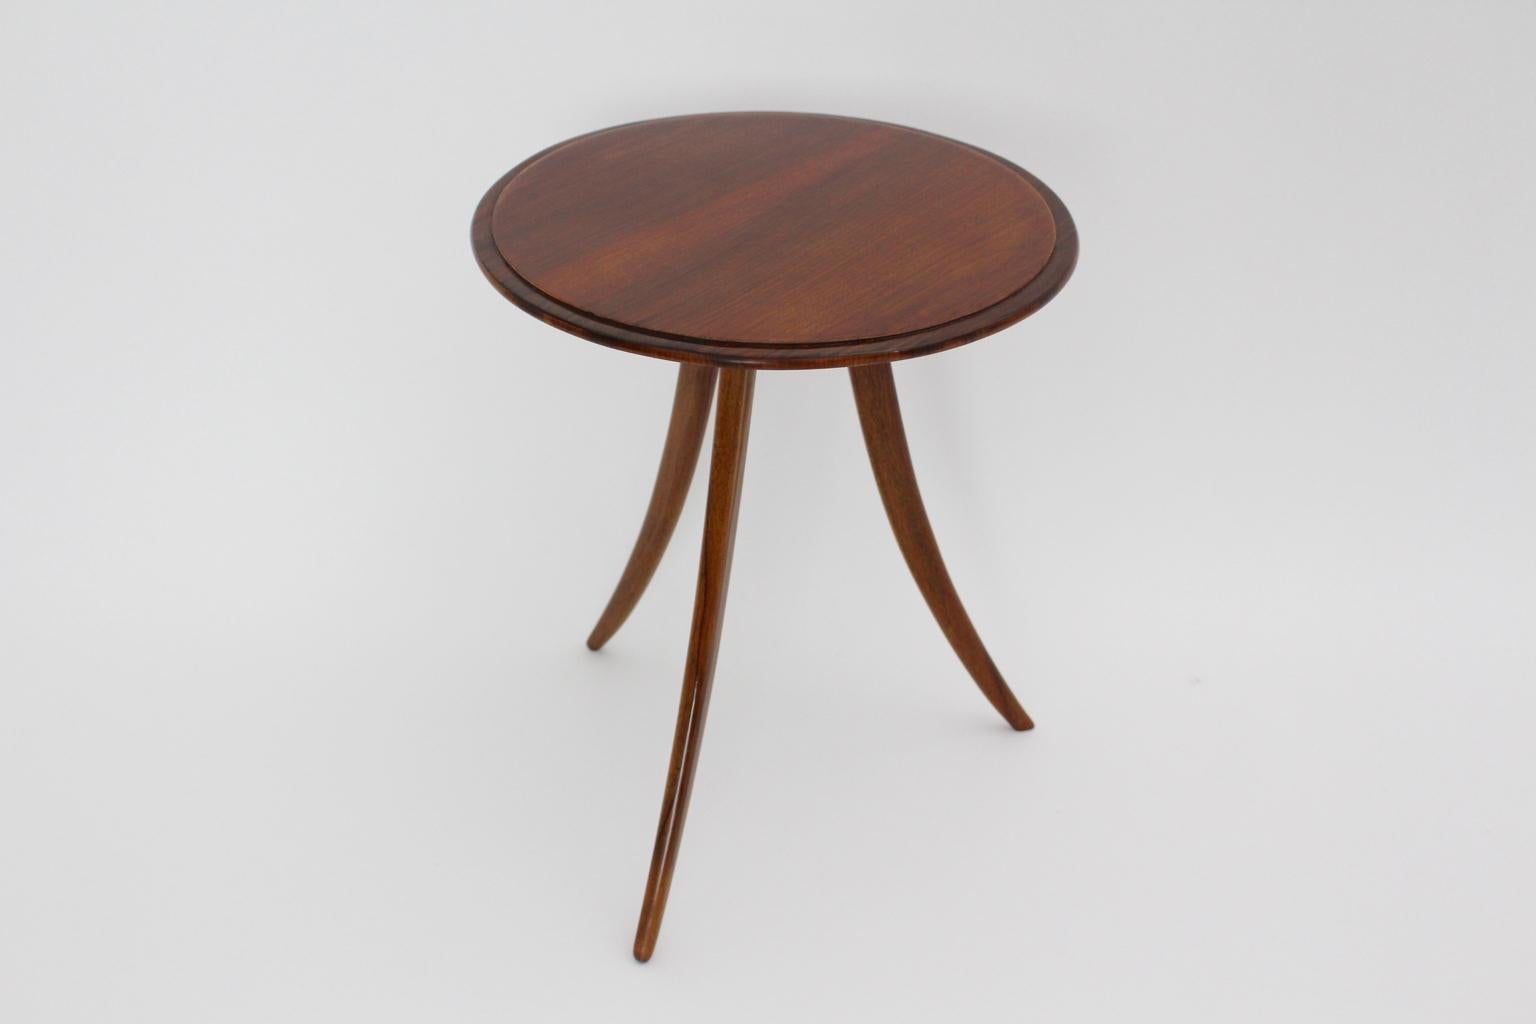 Art Deco circular coffee table or side table from walnut by Josef Frank for Haus & Garten circa 1925, Vienna.
The coffee table features three curved legs - solid walnut and a round walnut veneered tabletop.
So the coffee table stands for simple and